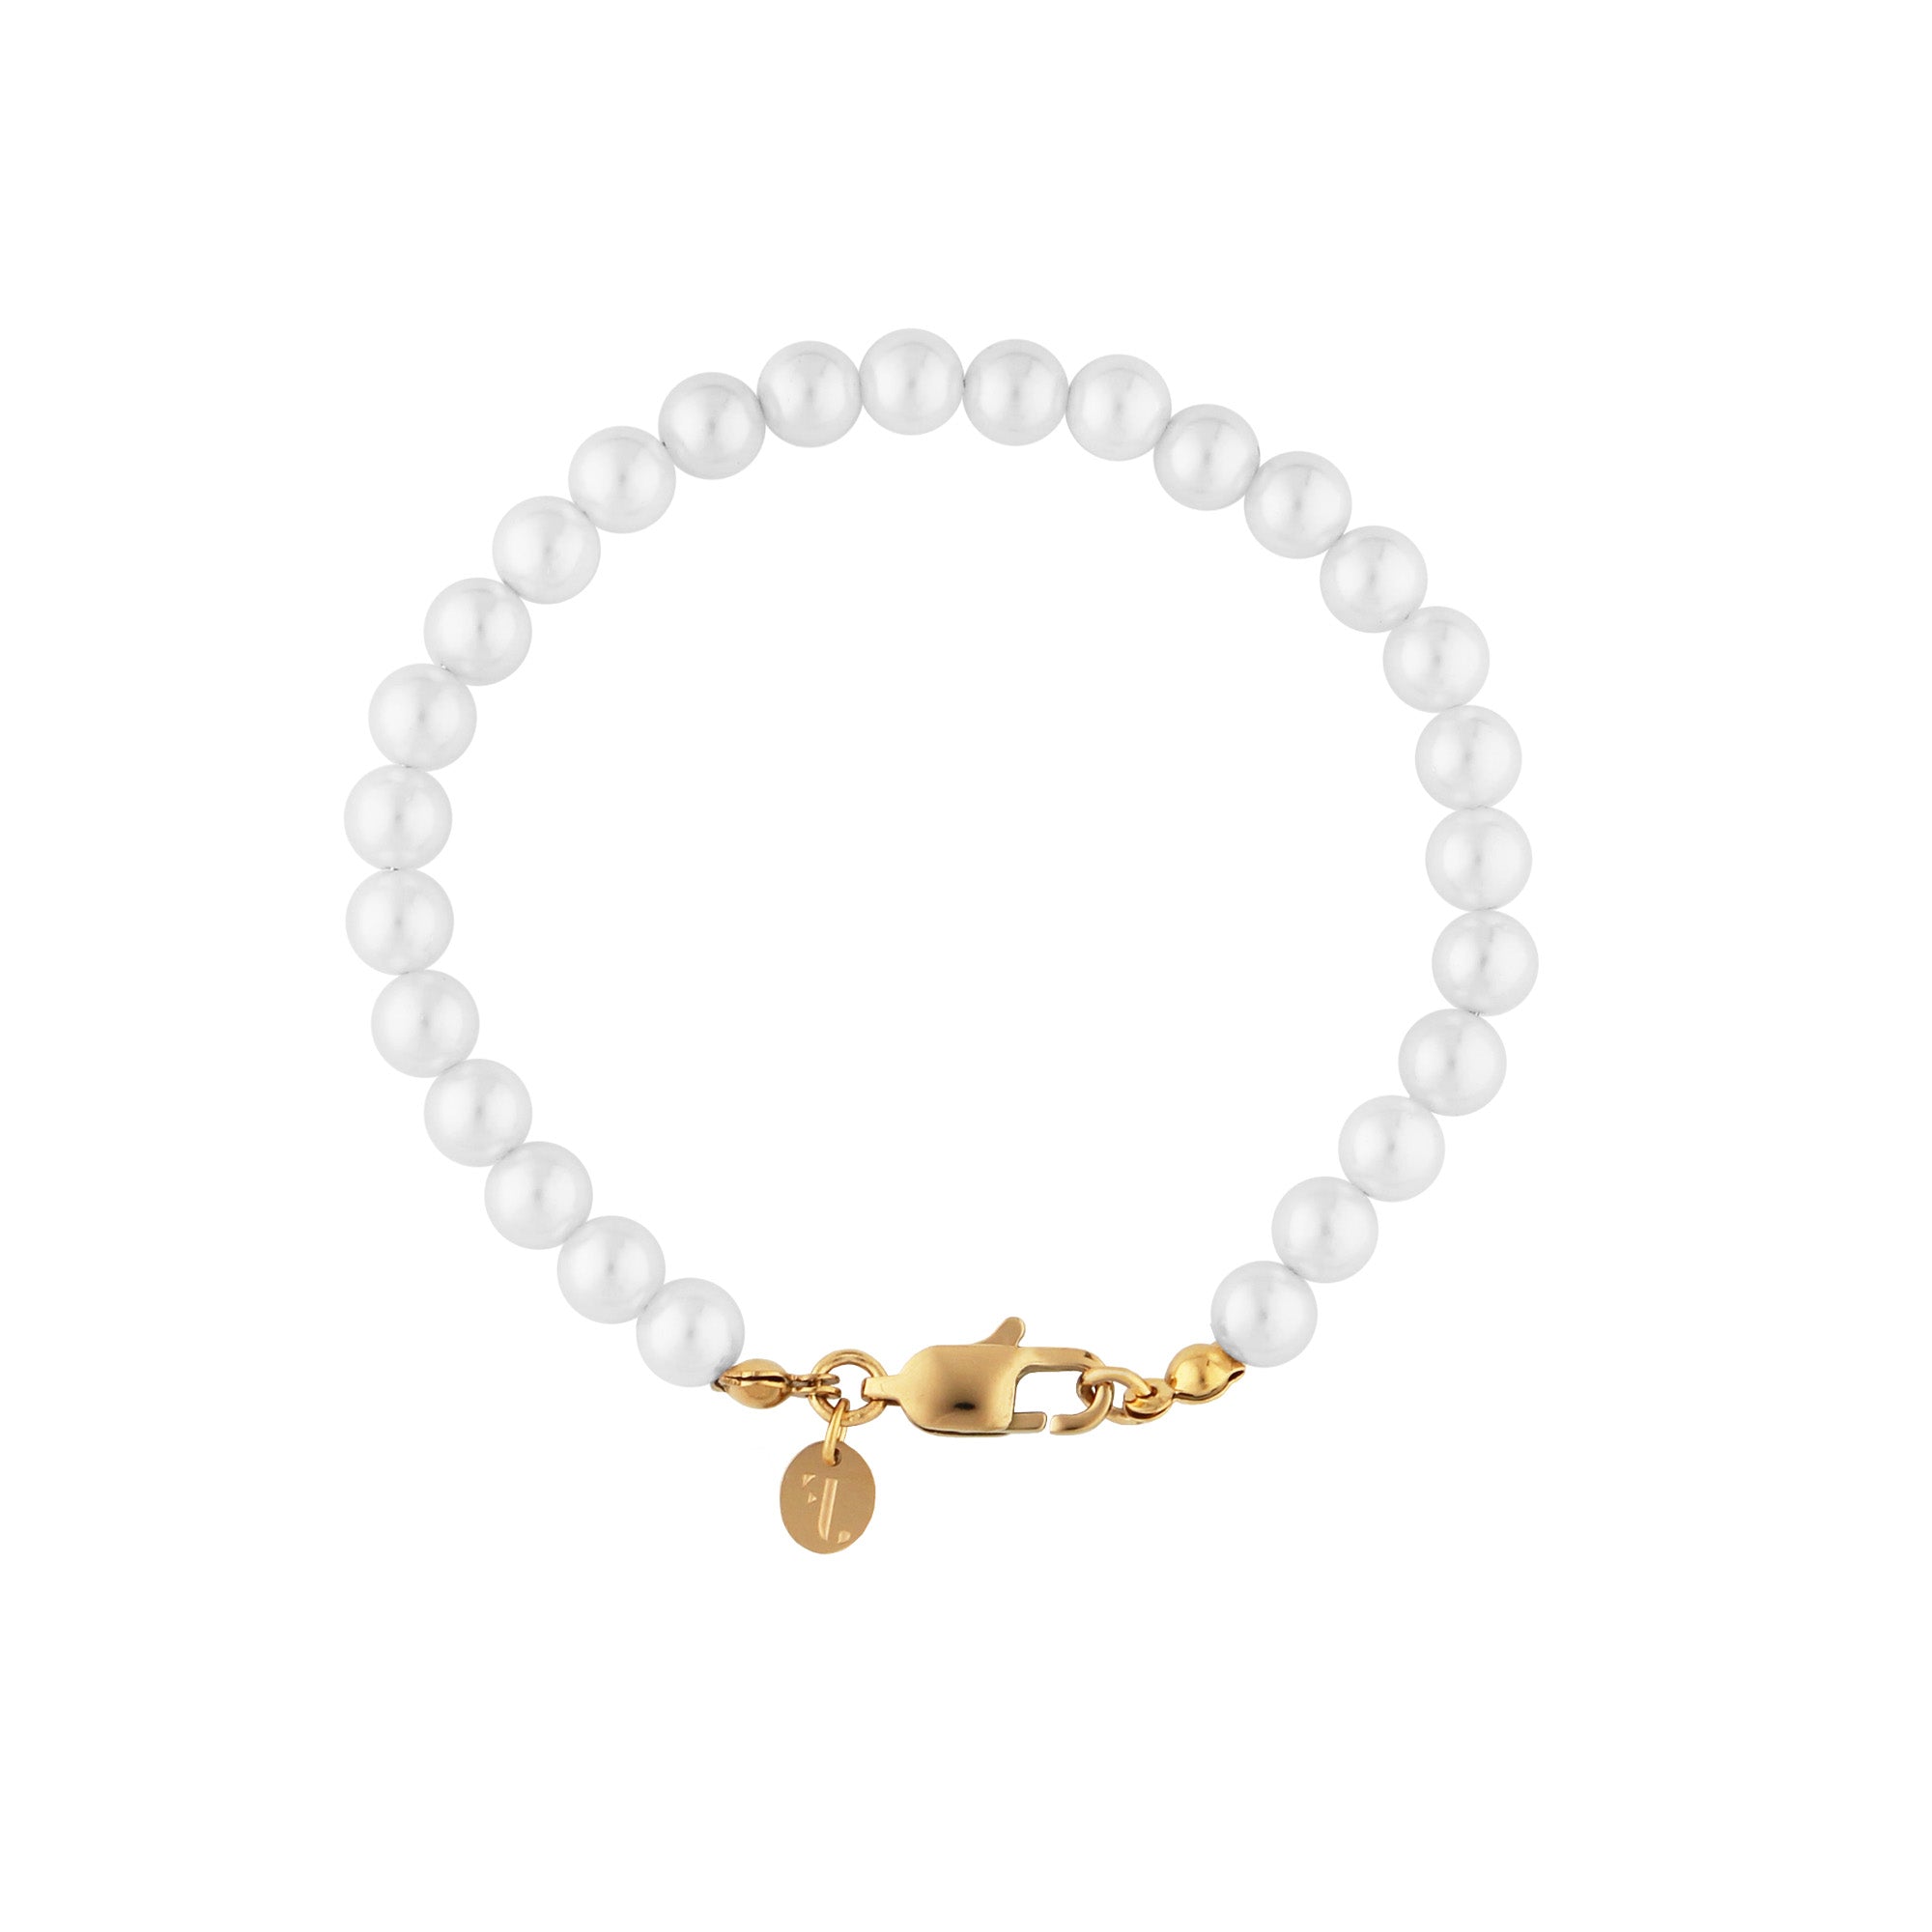 Var women's bracelet by Five Jwlry, designed with white glass pearls complemented by a gold stainless steel buckle. Available in sizes 20cm and 23cm. Crafted from water-resistant 316L stainless steel. Hypoallergenic with a 2-year warranty.